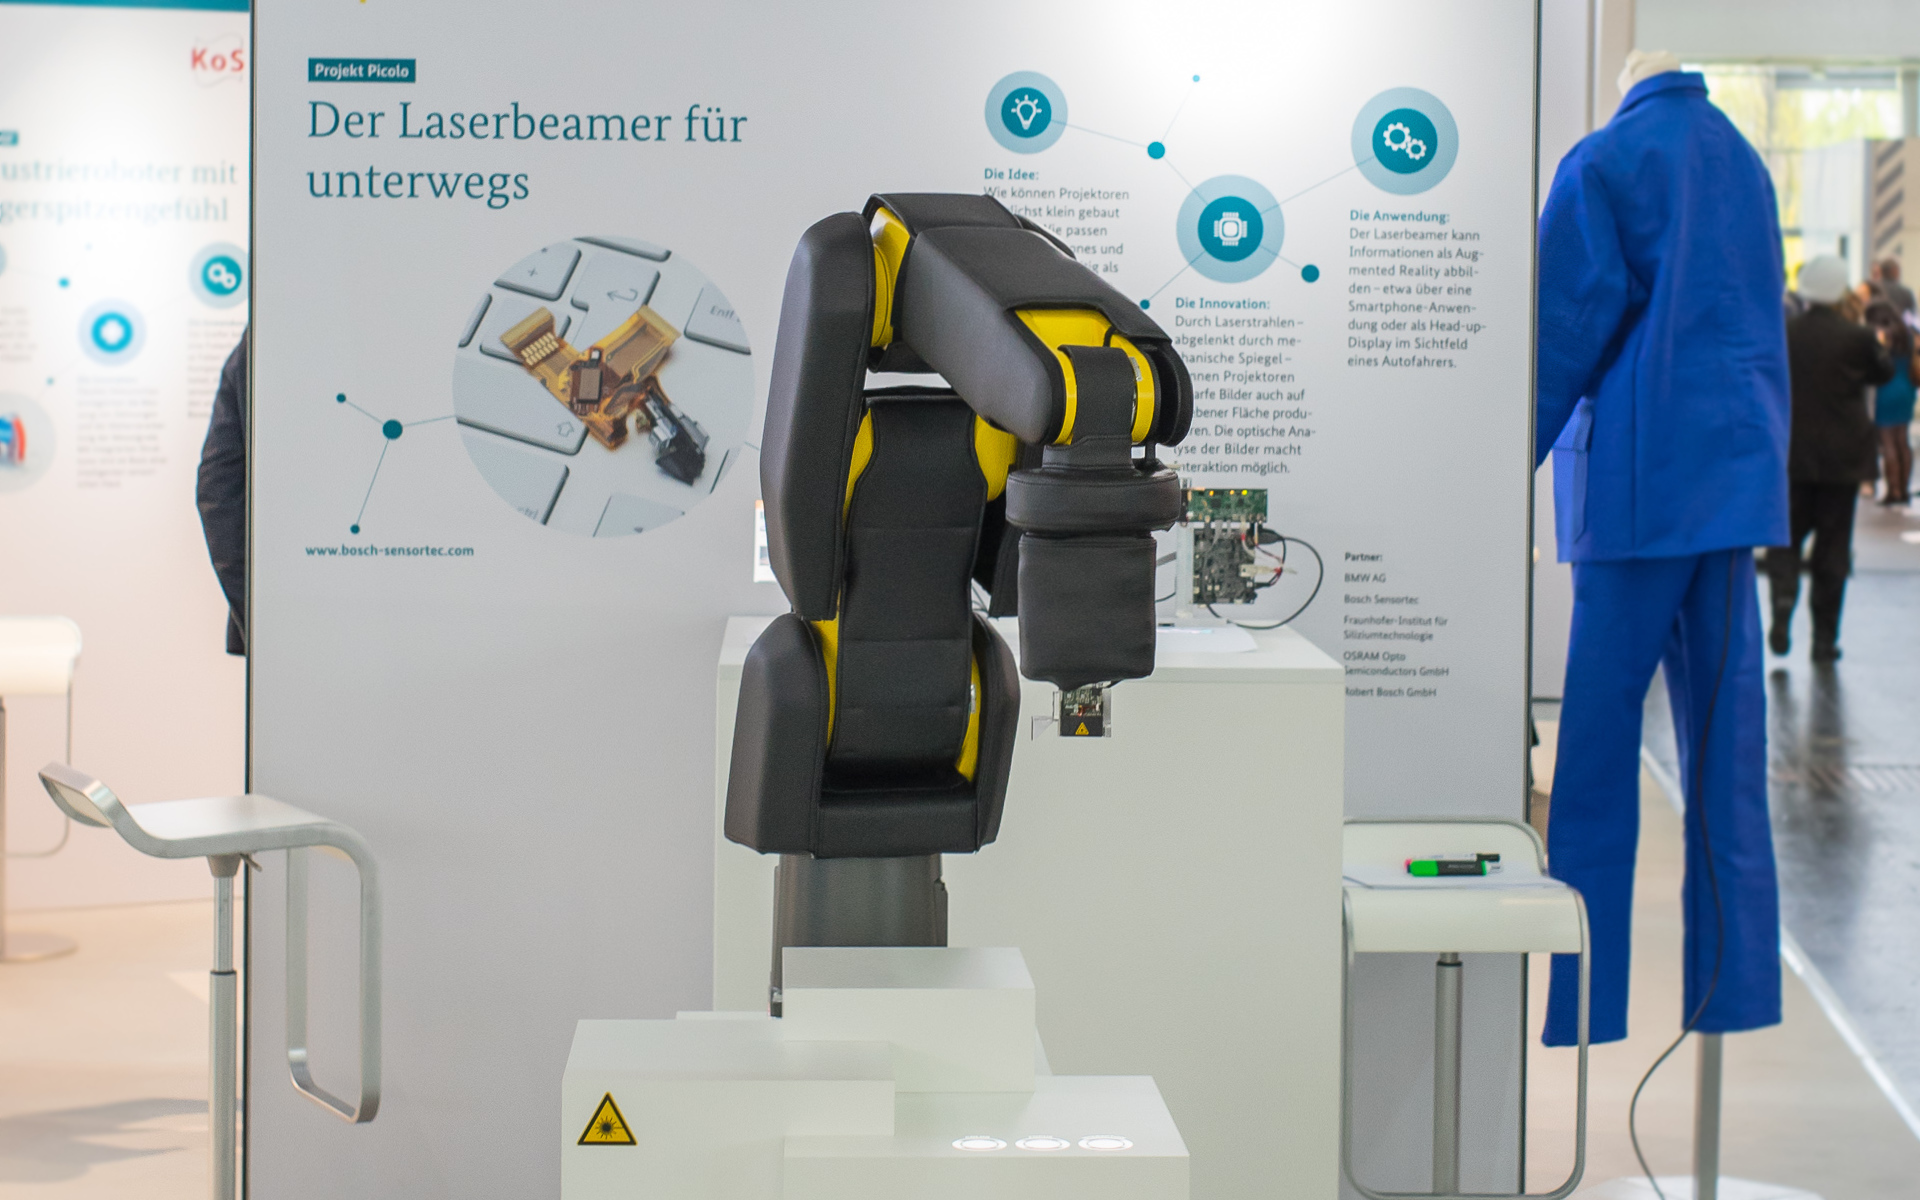 Robot and Laser Projector at Hanover Fair 2016